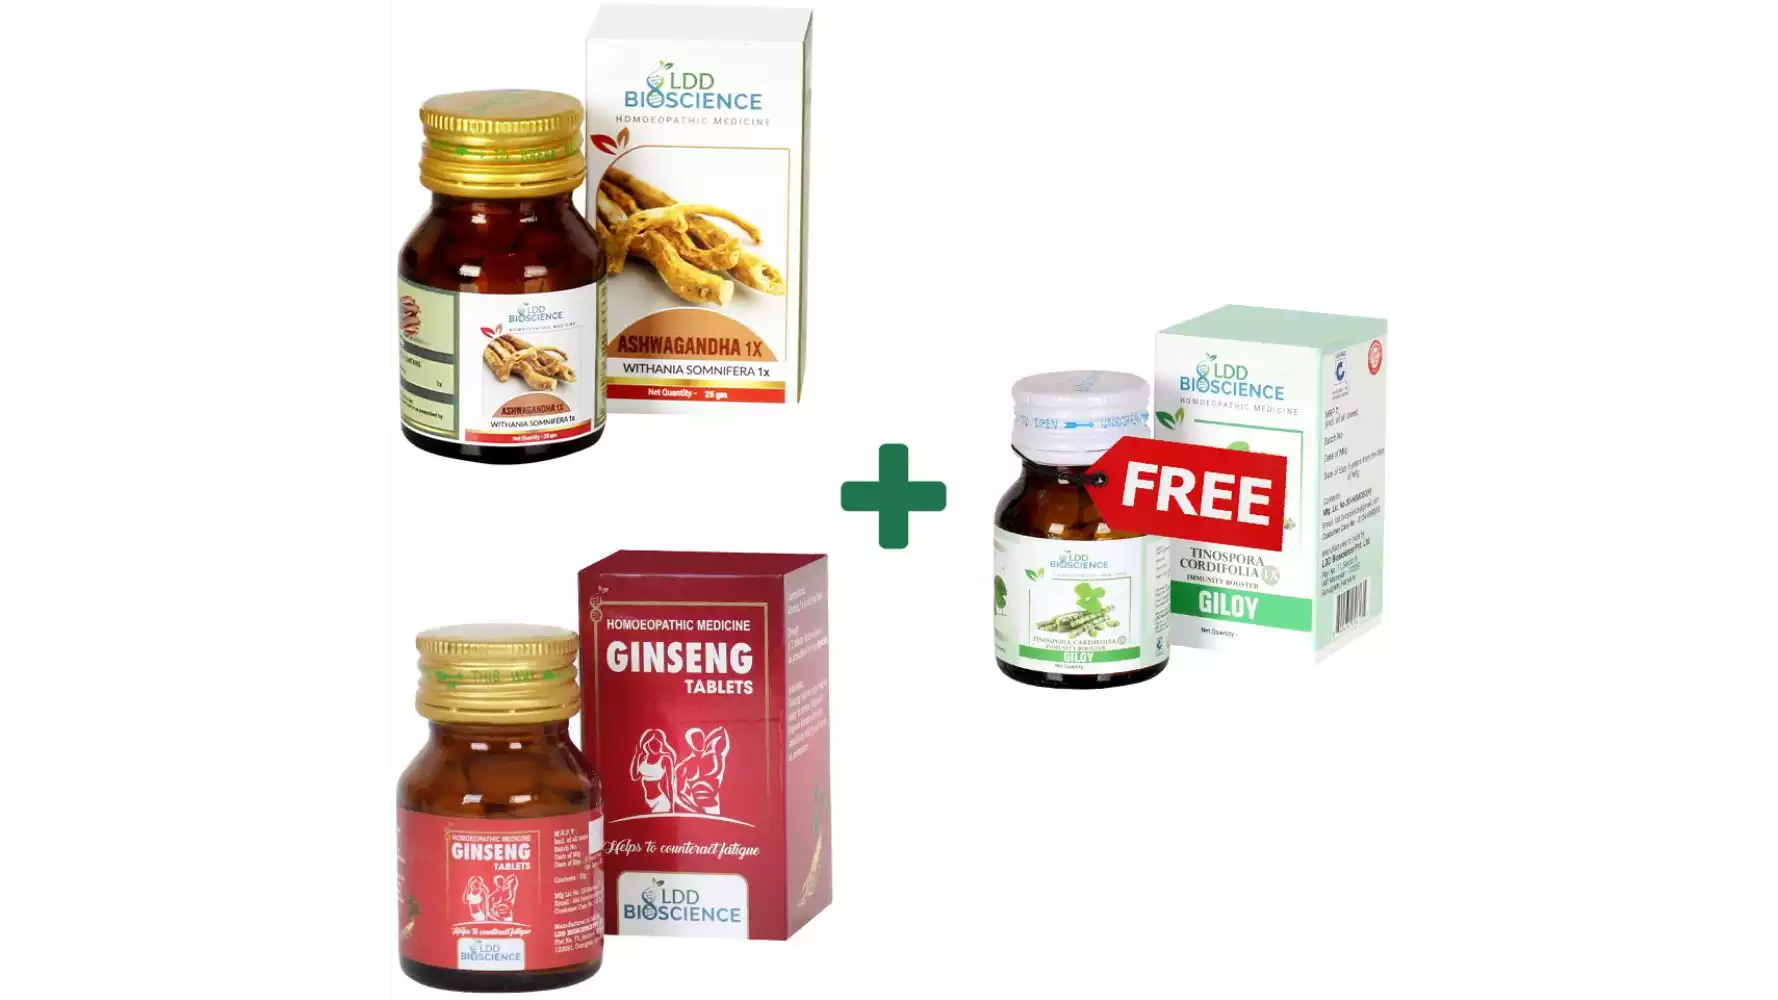 LDD Bioscience Get Free Giloy Tablets with Ashwagandha1x & Ginseng Tablets (1Pack)